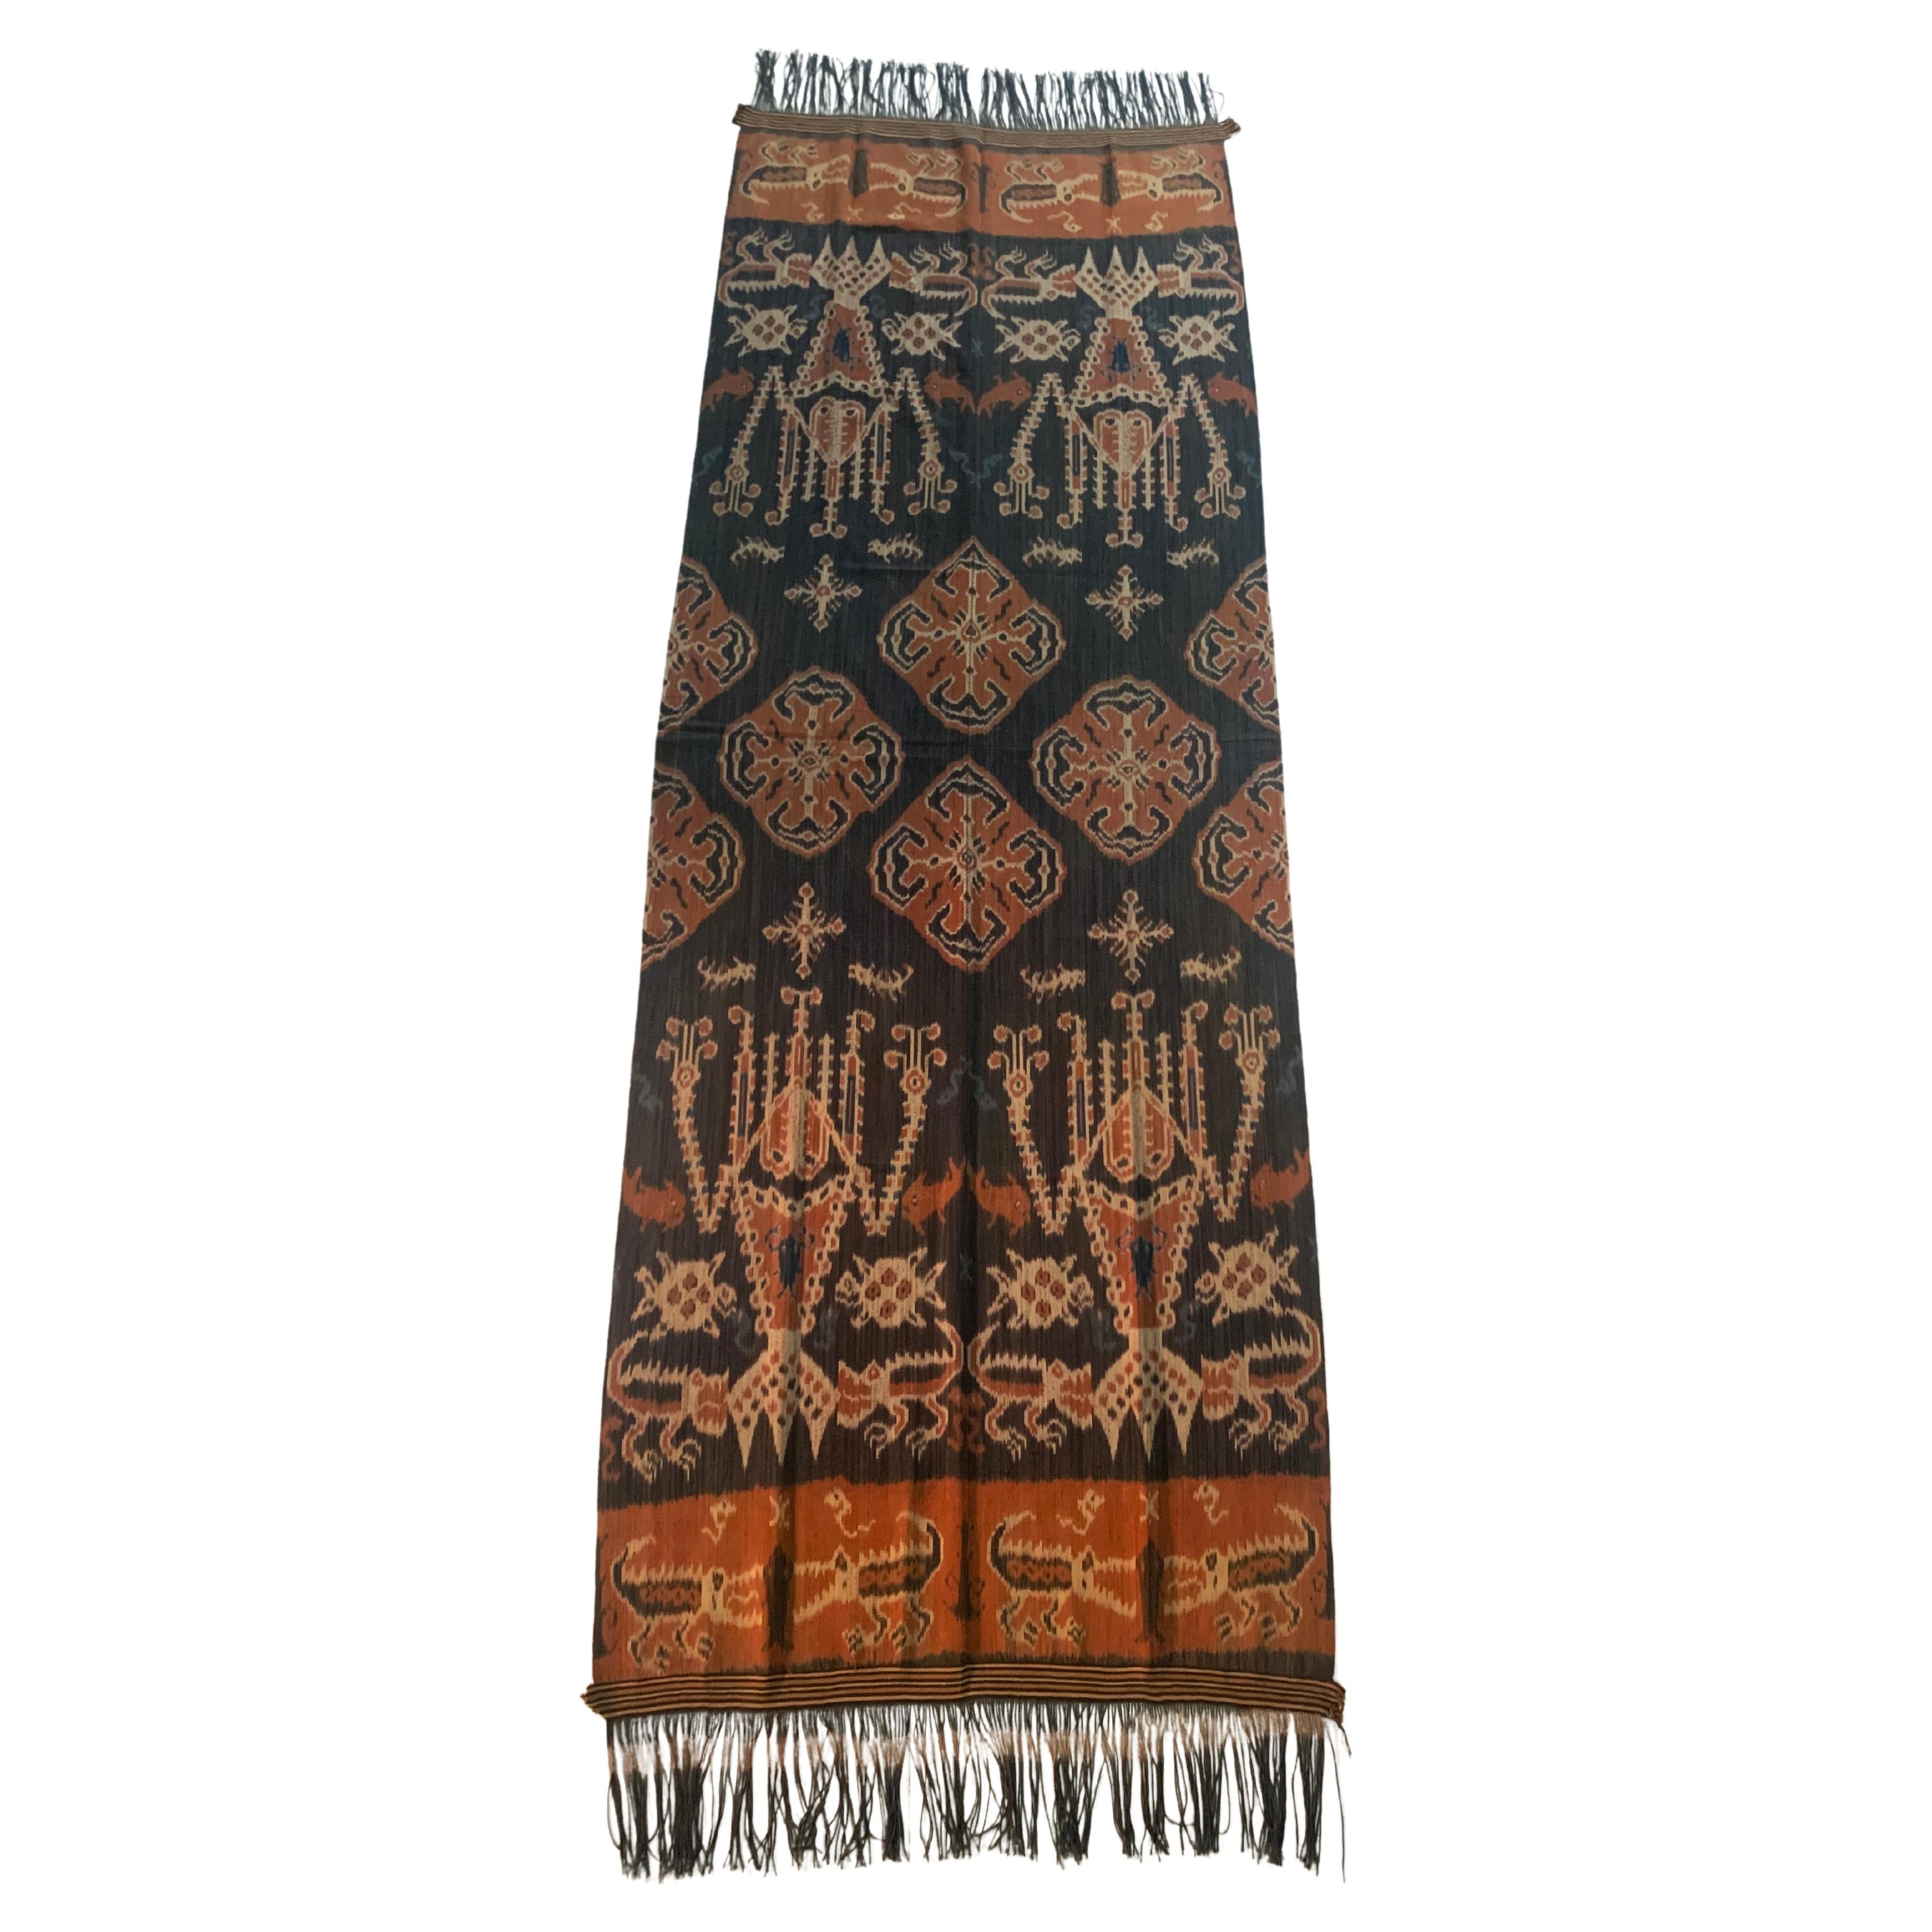 Ikat Textile from Sumba Island with Stunning Tribal Motifs, Indonesia